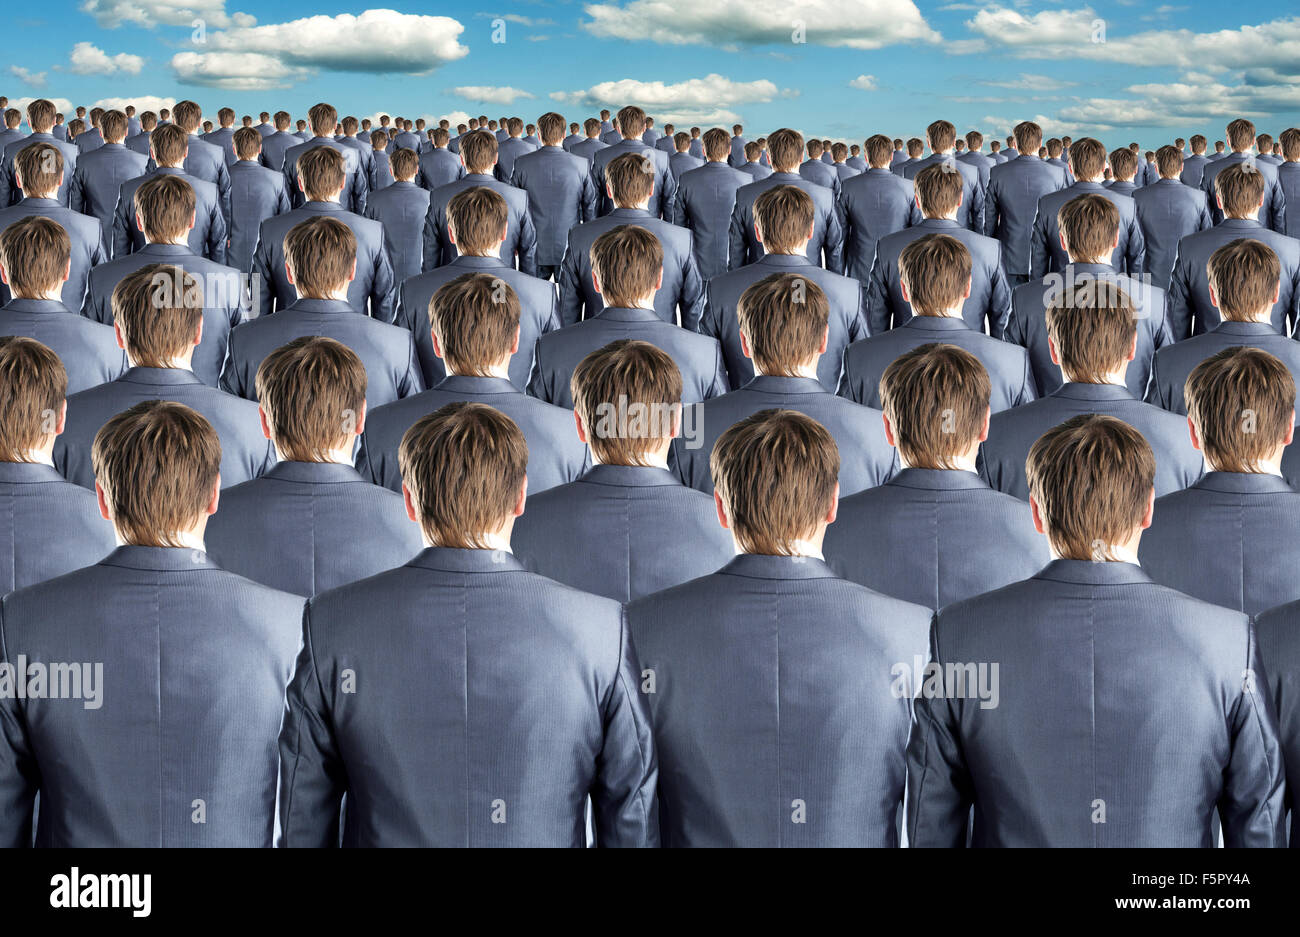 Rear view of many identical businessmen clones Stock Photo